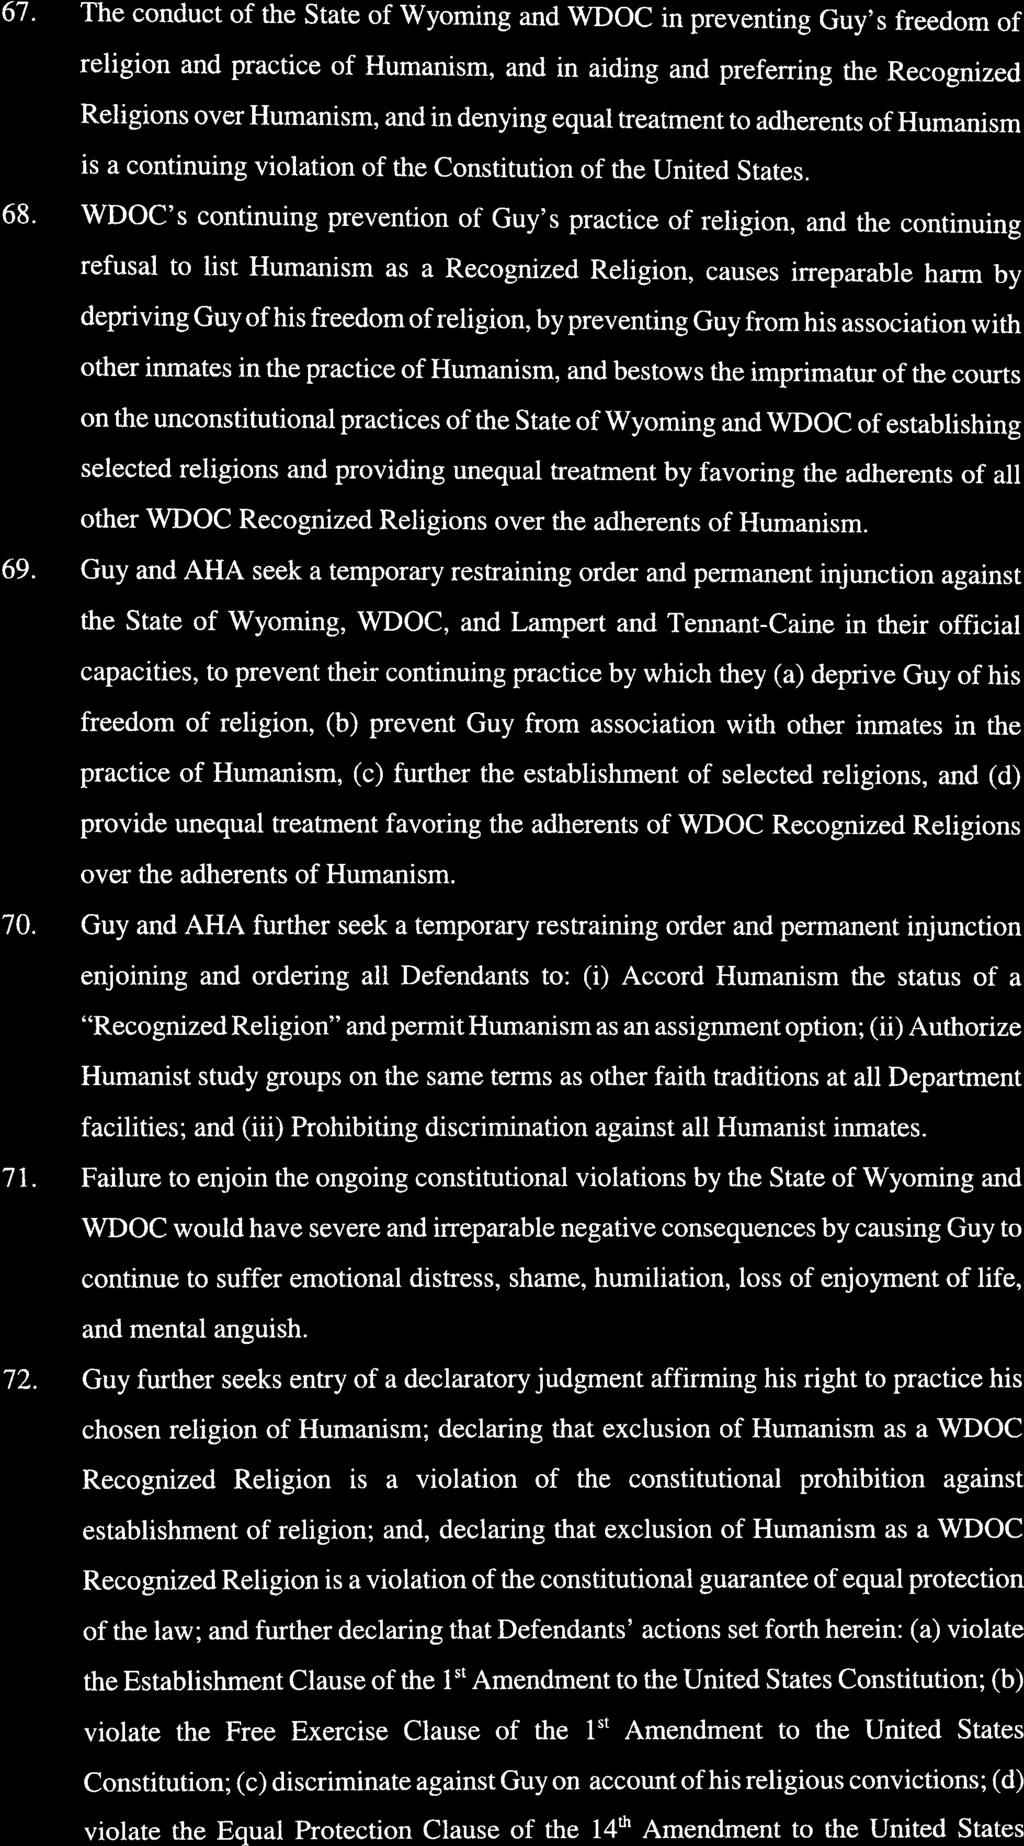 67. The conduct of the State of Wyoming and WDOC in preventing Guy s freedom of religion and practice of Humanism, and in aiding and preferring the Recognized Religions over Humanism, and in denying